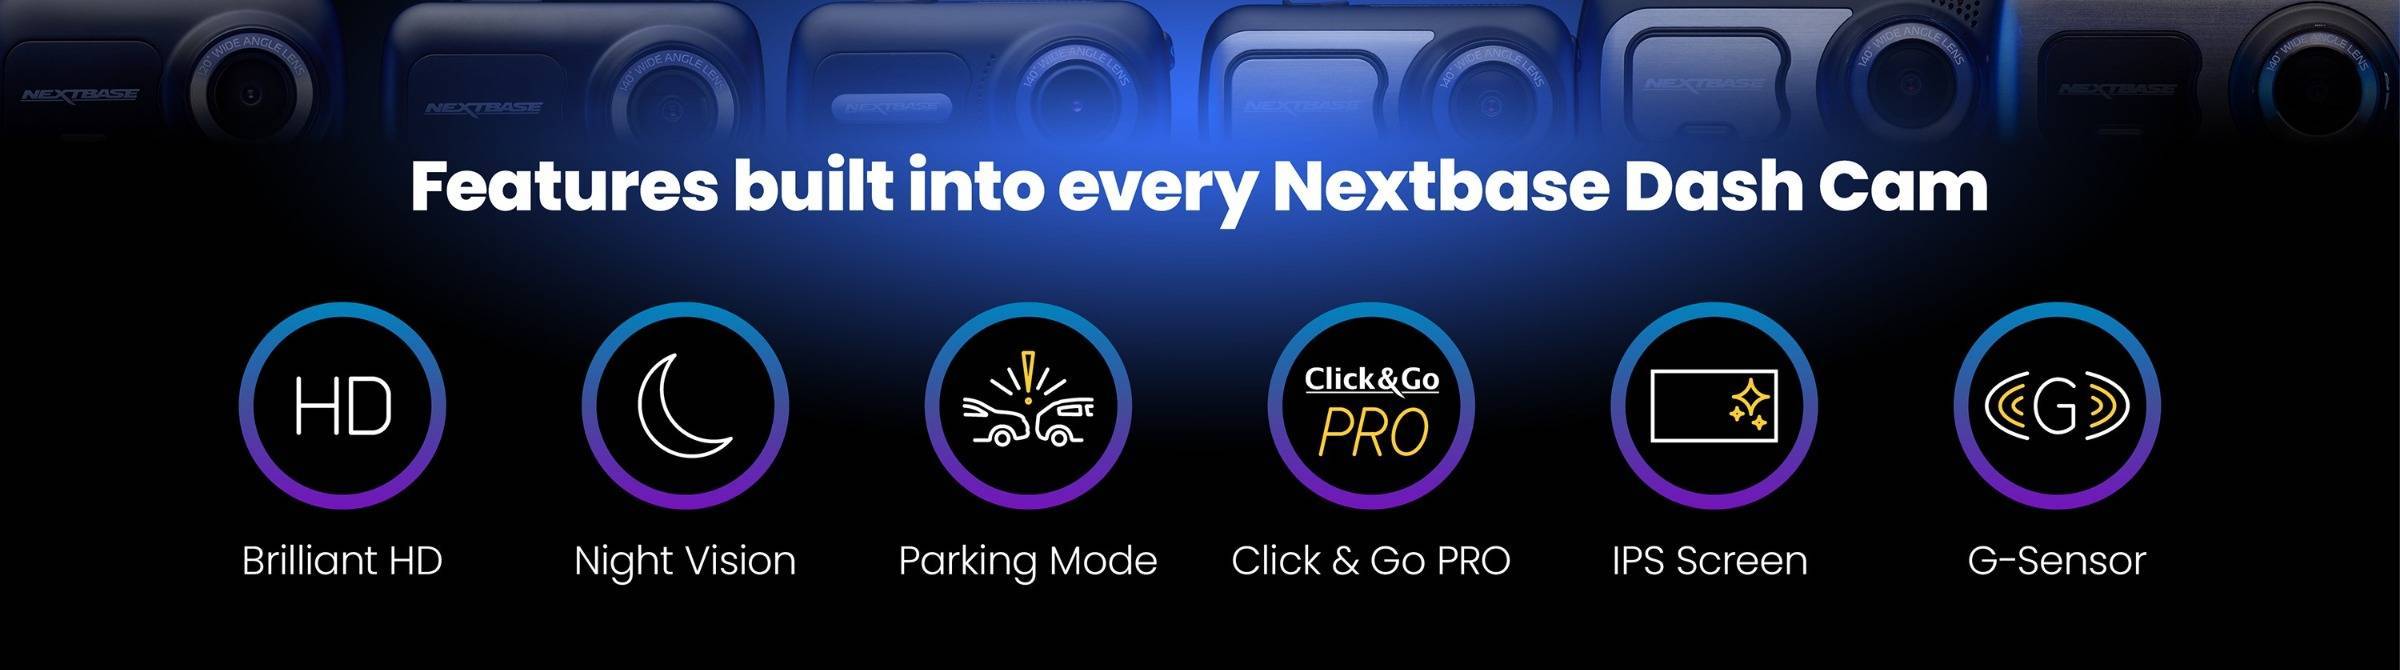 Features built into every Nextbase Dash Cam